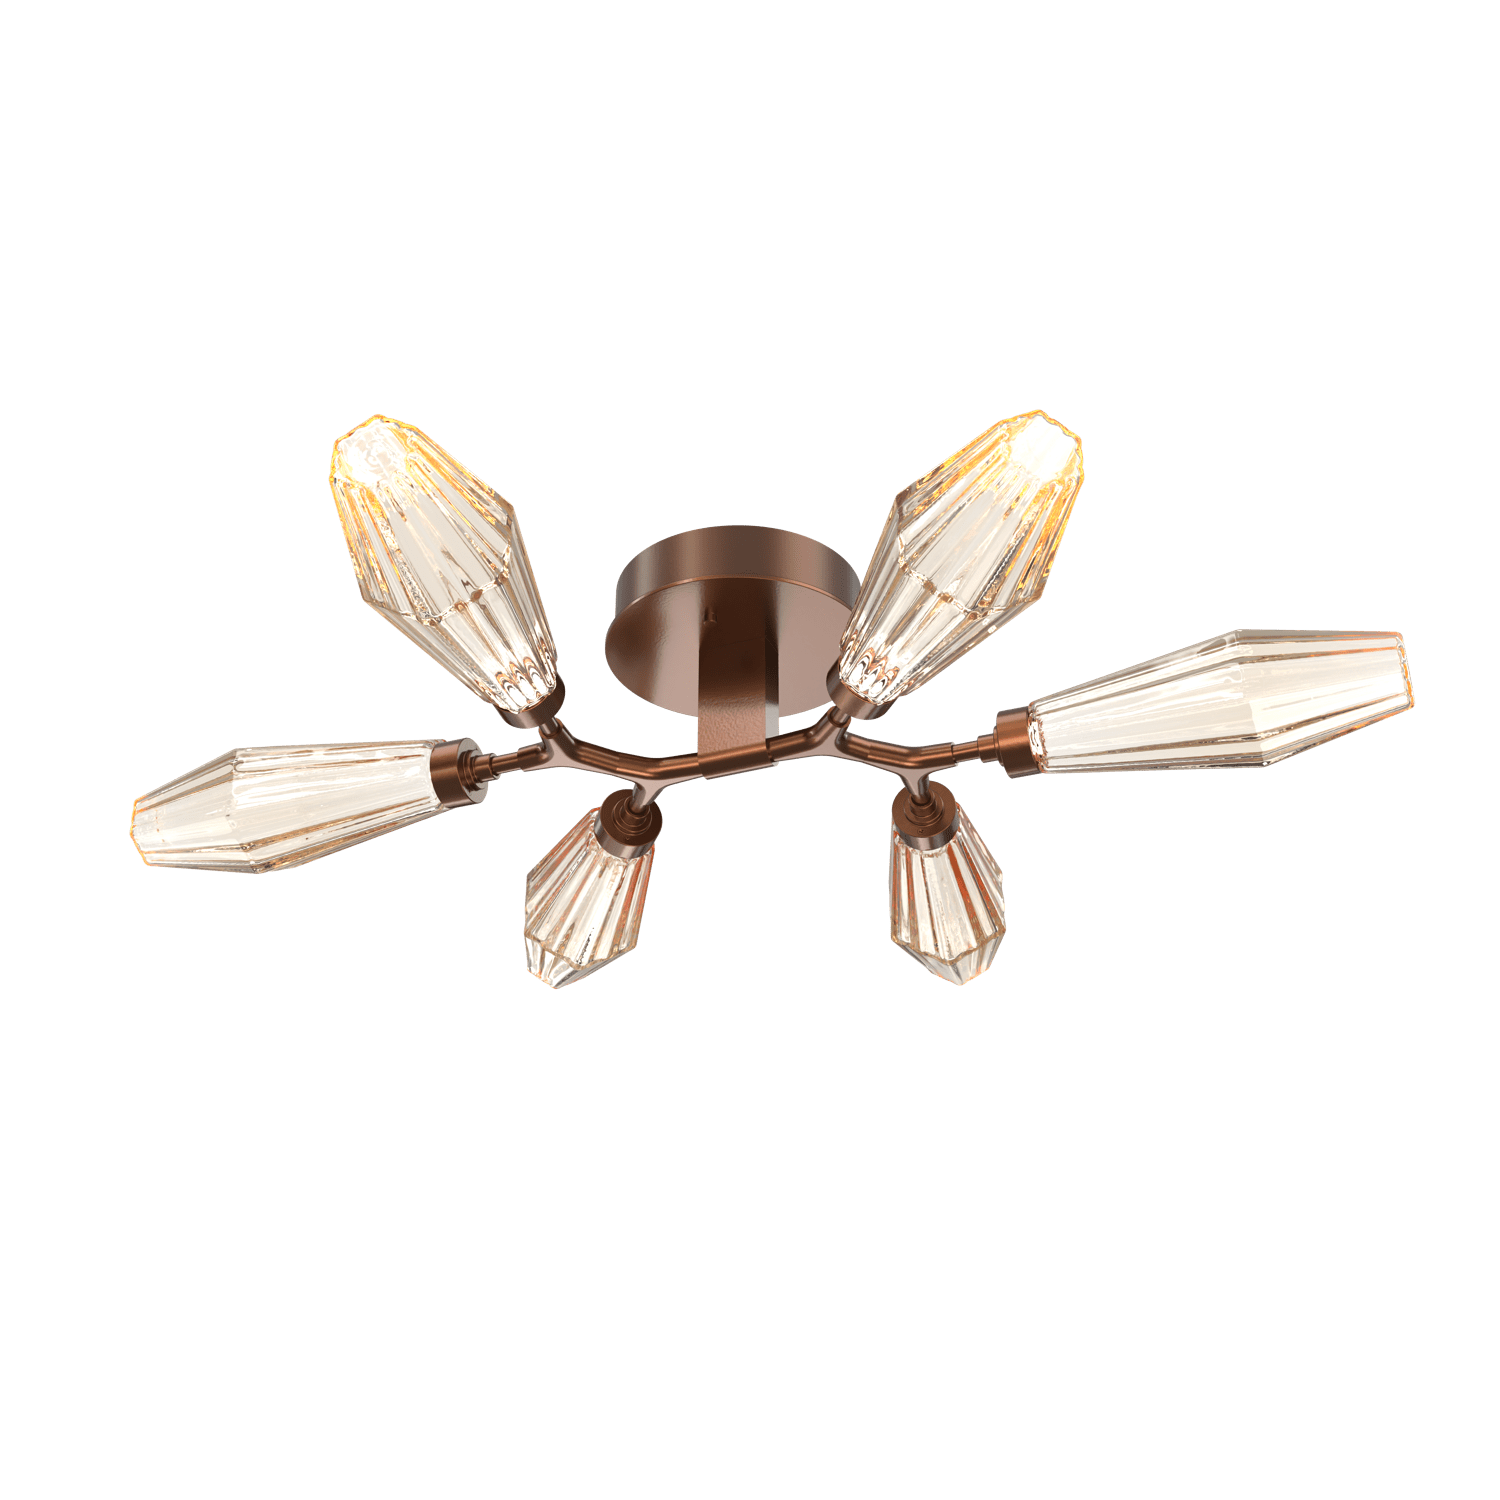 CLB0049-01-BB-RA-Hammerton-Studio-Aalto-6-light-organic-flush-mount-light-with-burnished-bronze-finish-and-optic-ribbed-amber-glass-shades-and-LED-lamping